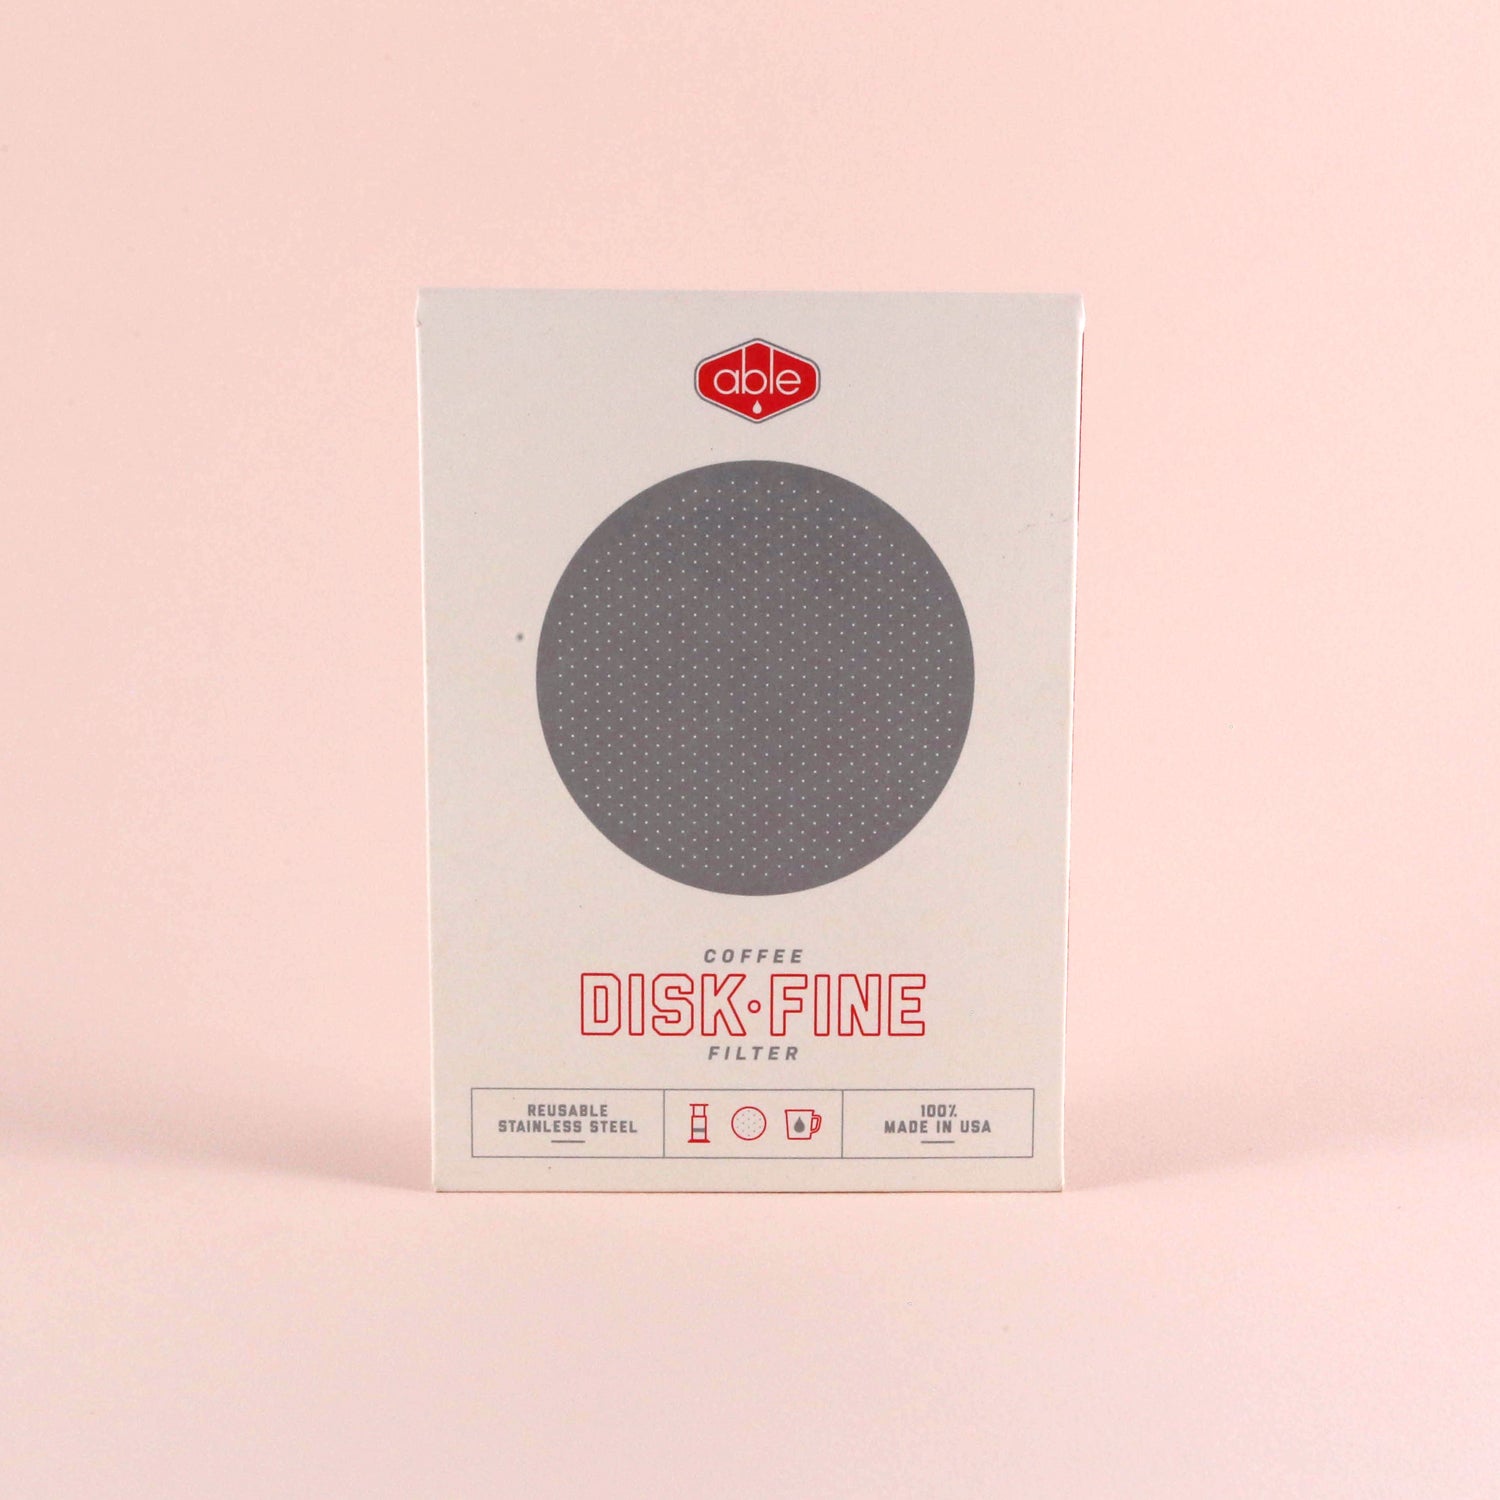 A Tandem Coffee Roasters Able Aeropress Filter Disk (Fine) designed for AeroPress is displayed in front of its packaging, which is labeled "disk fine," against a soft pink background.